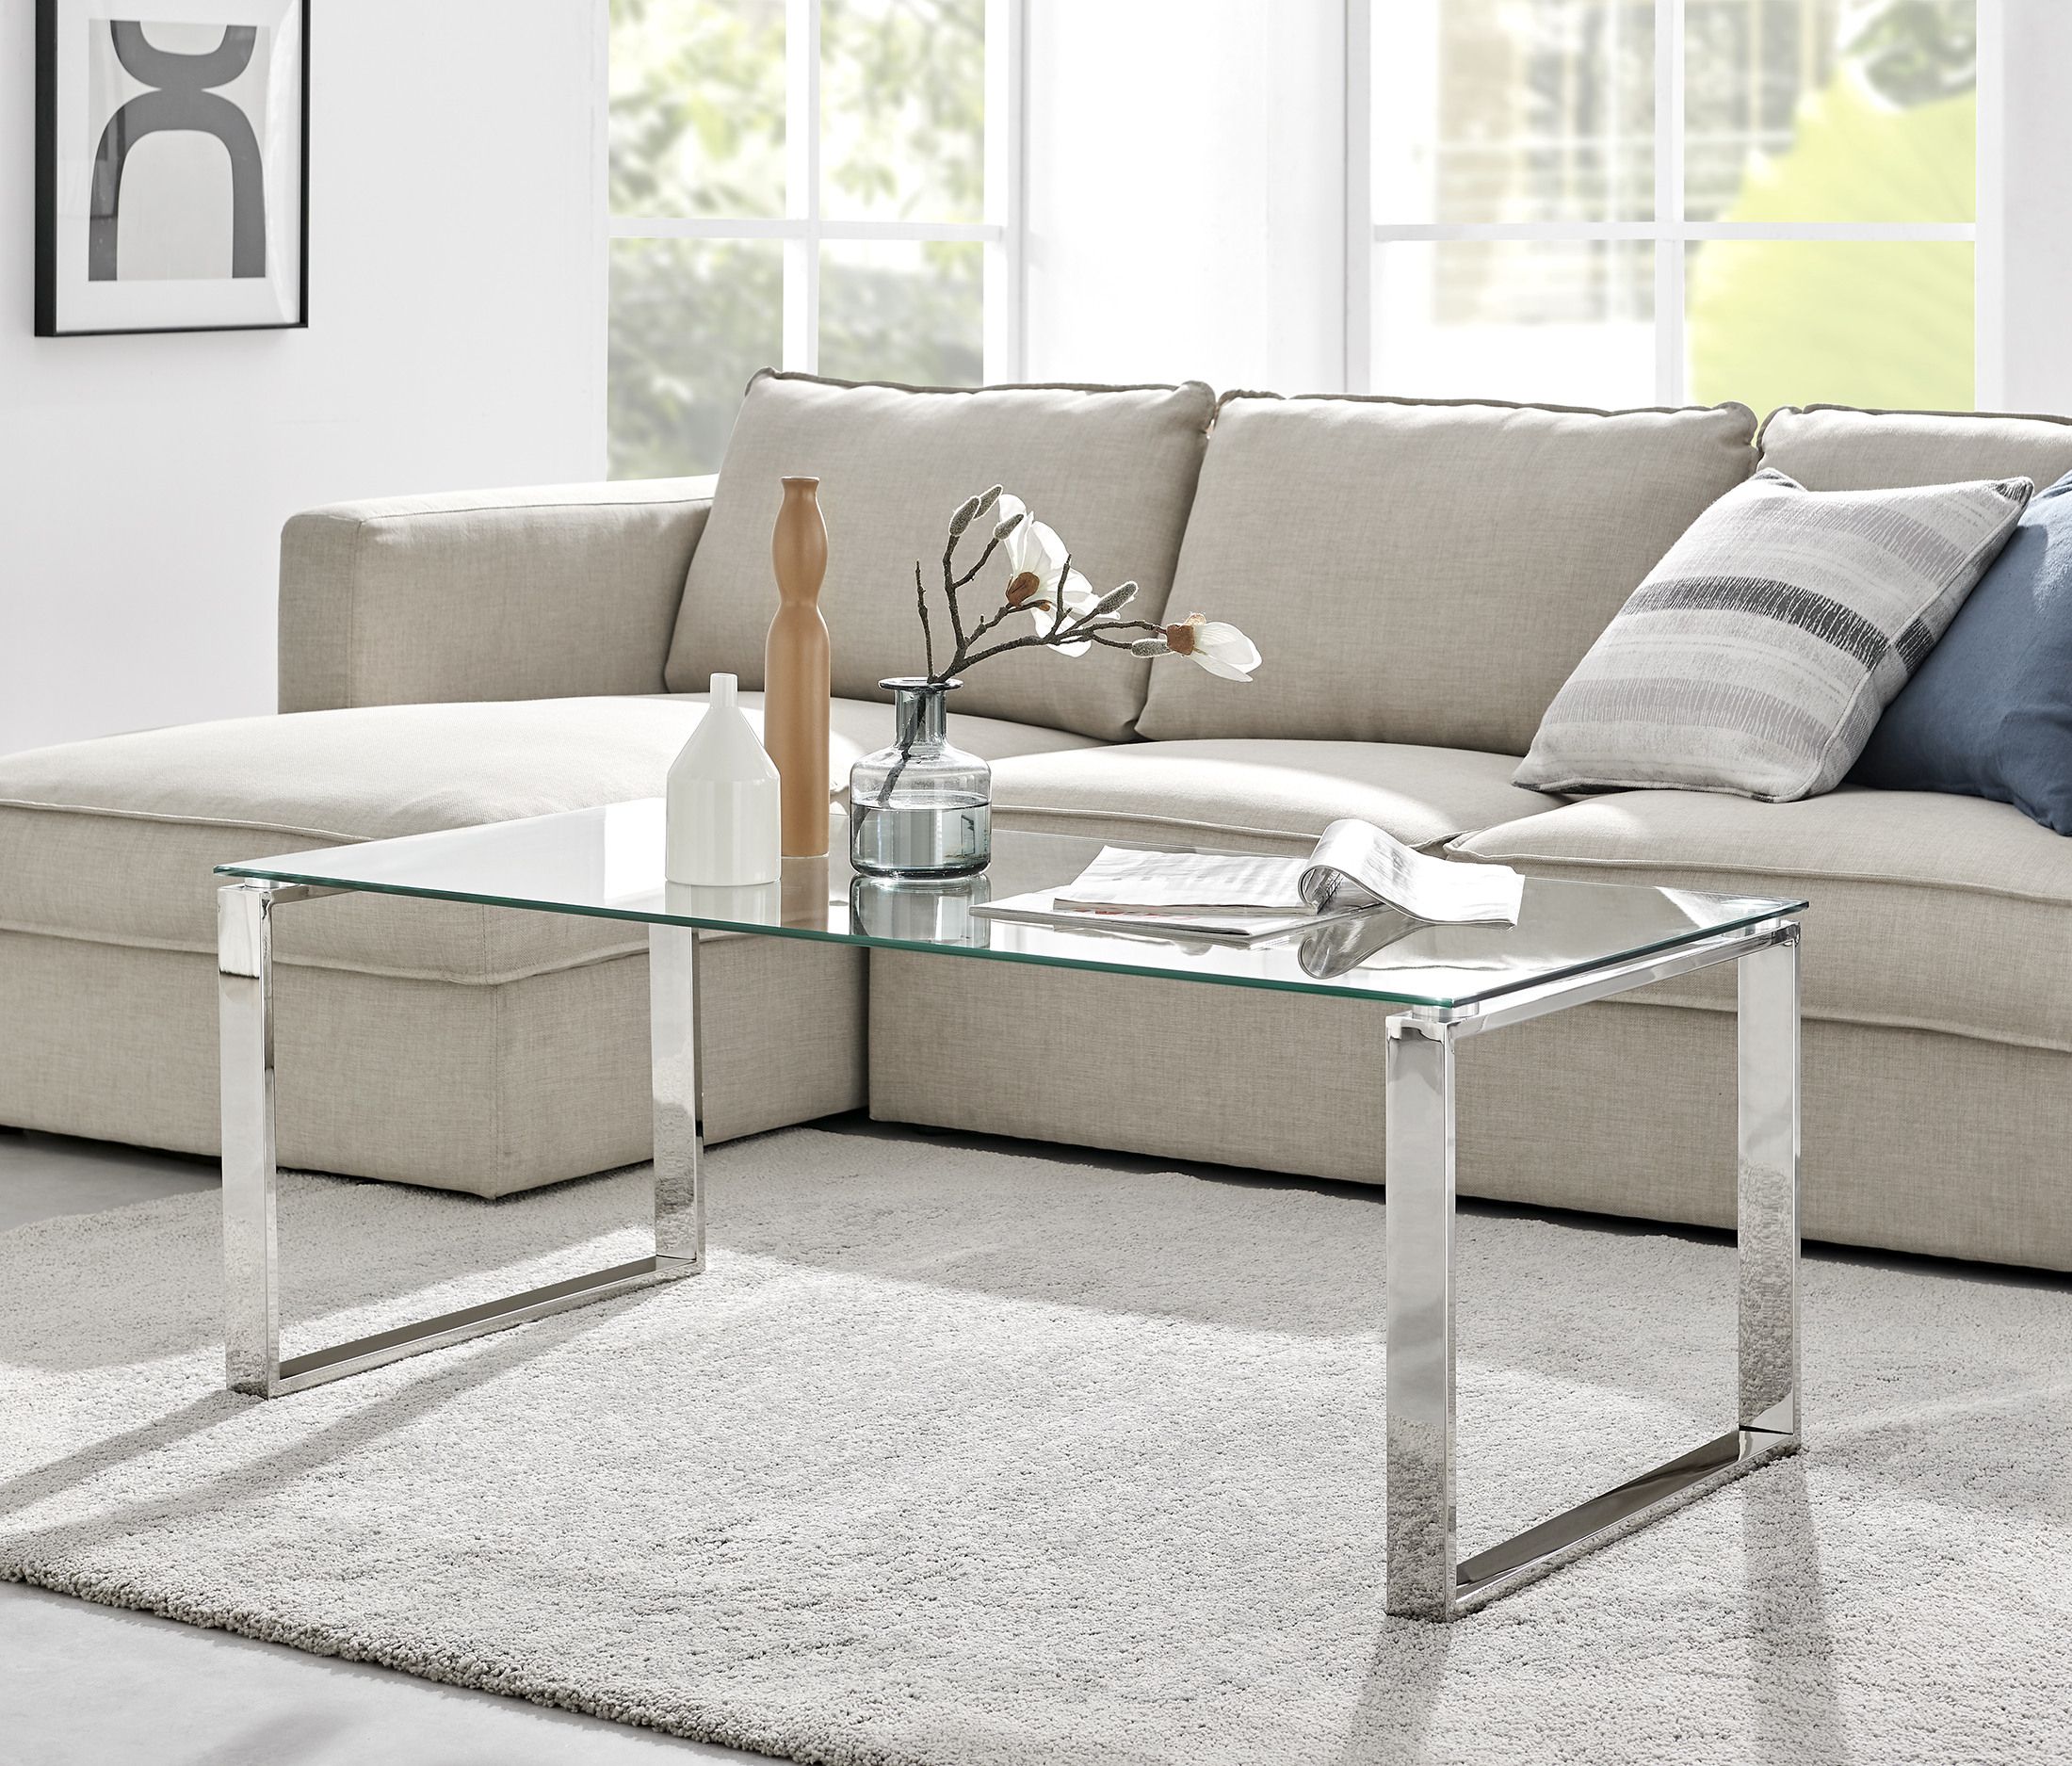 Modern Glass & Chrome Coffee Table | Furniturebox Throughout Chrome Coffee Tables (View 2 of 20)